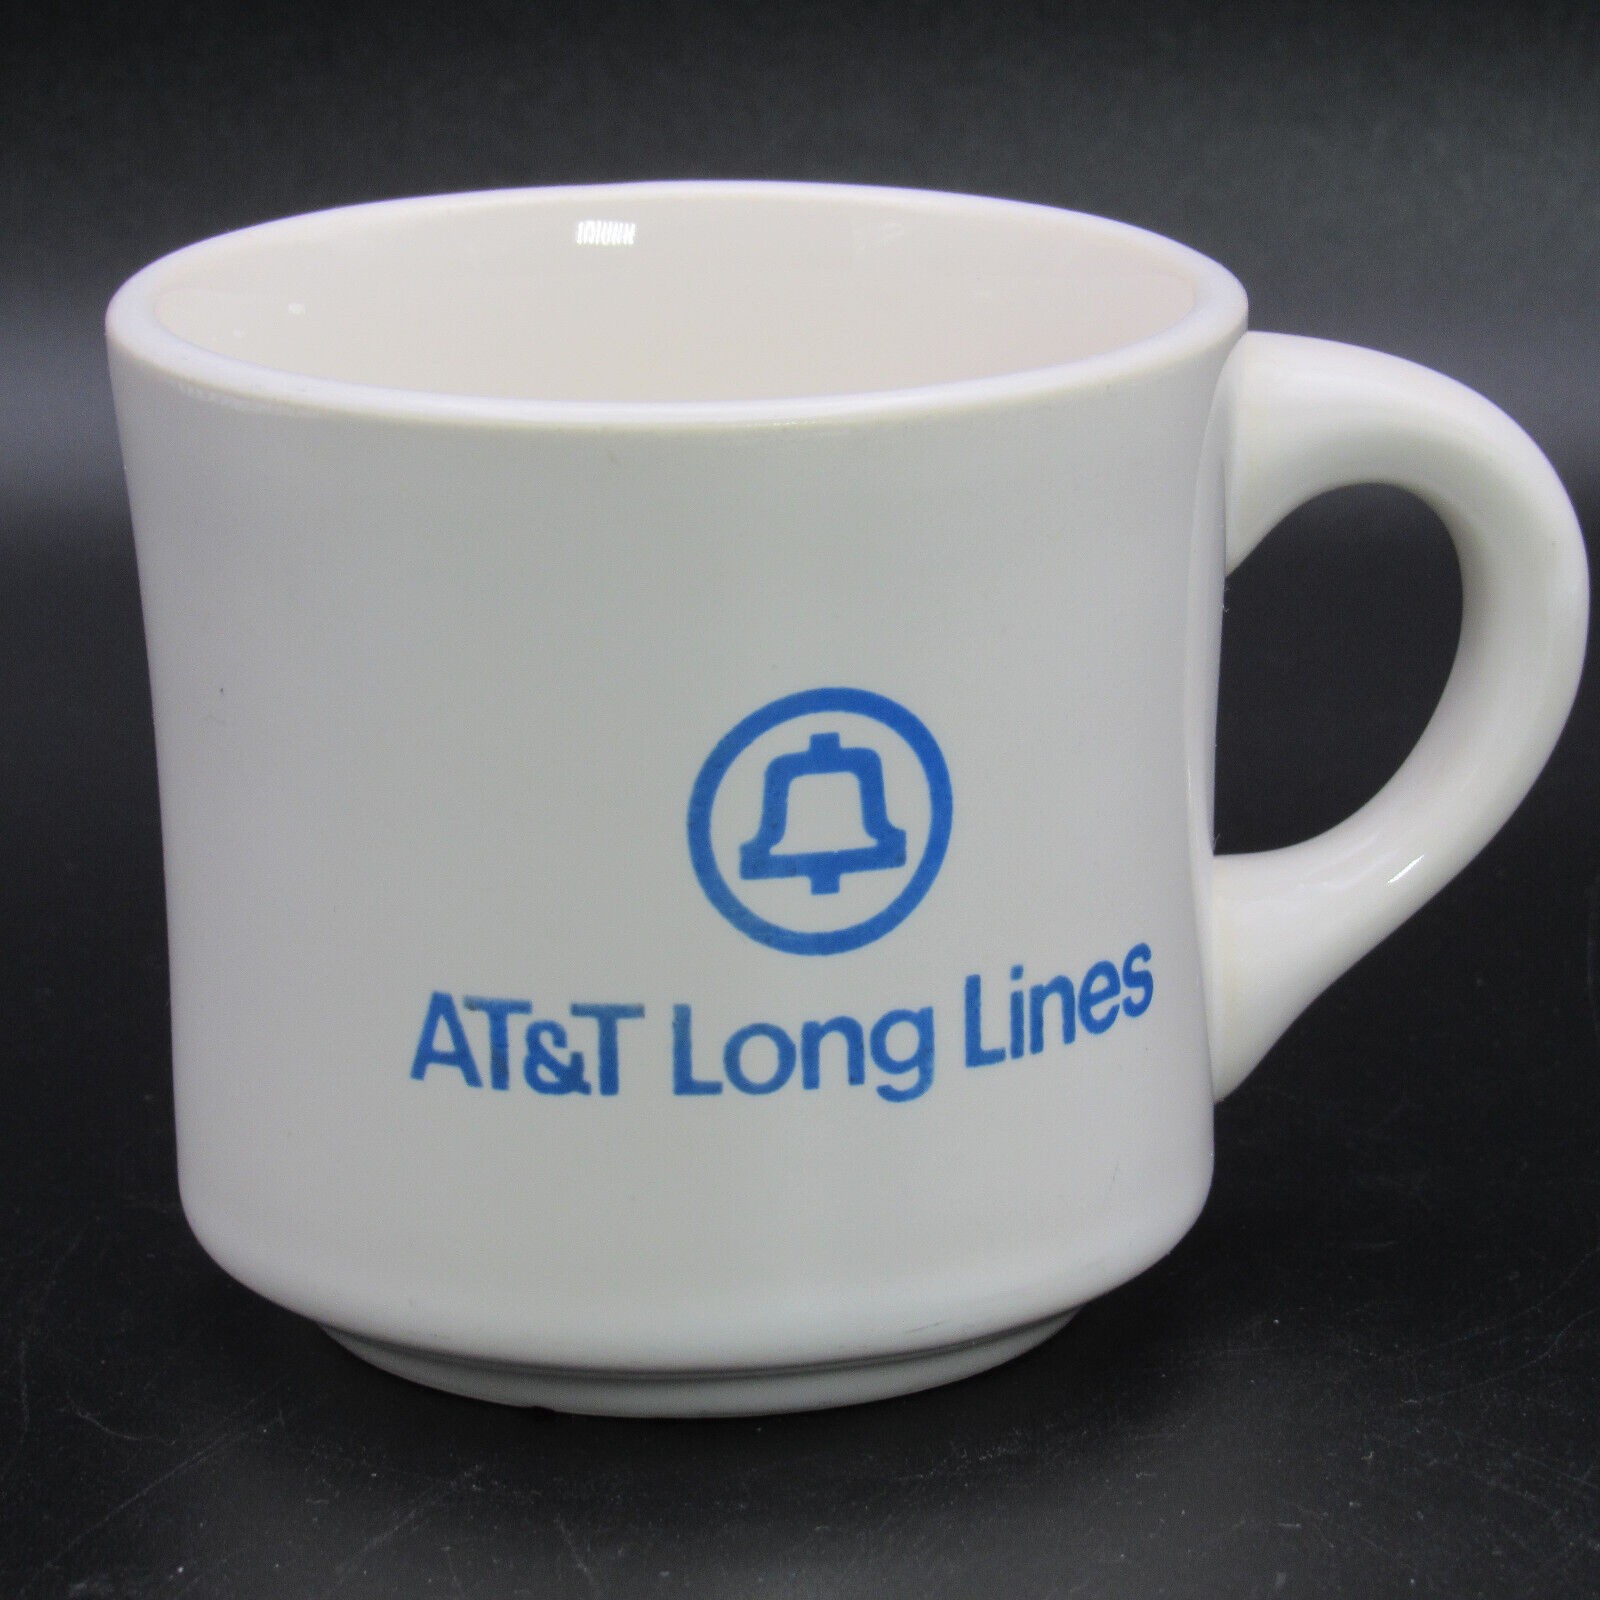 AT&T Long Lines Mug, Microwave Frequency Relay Network, Vintage, Tech History